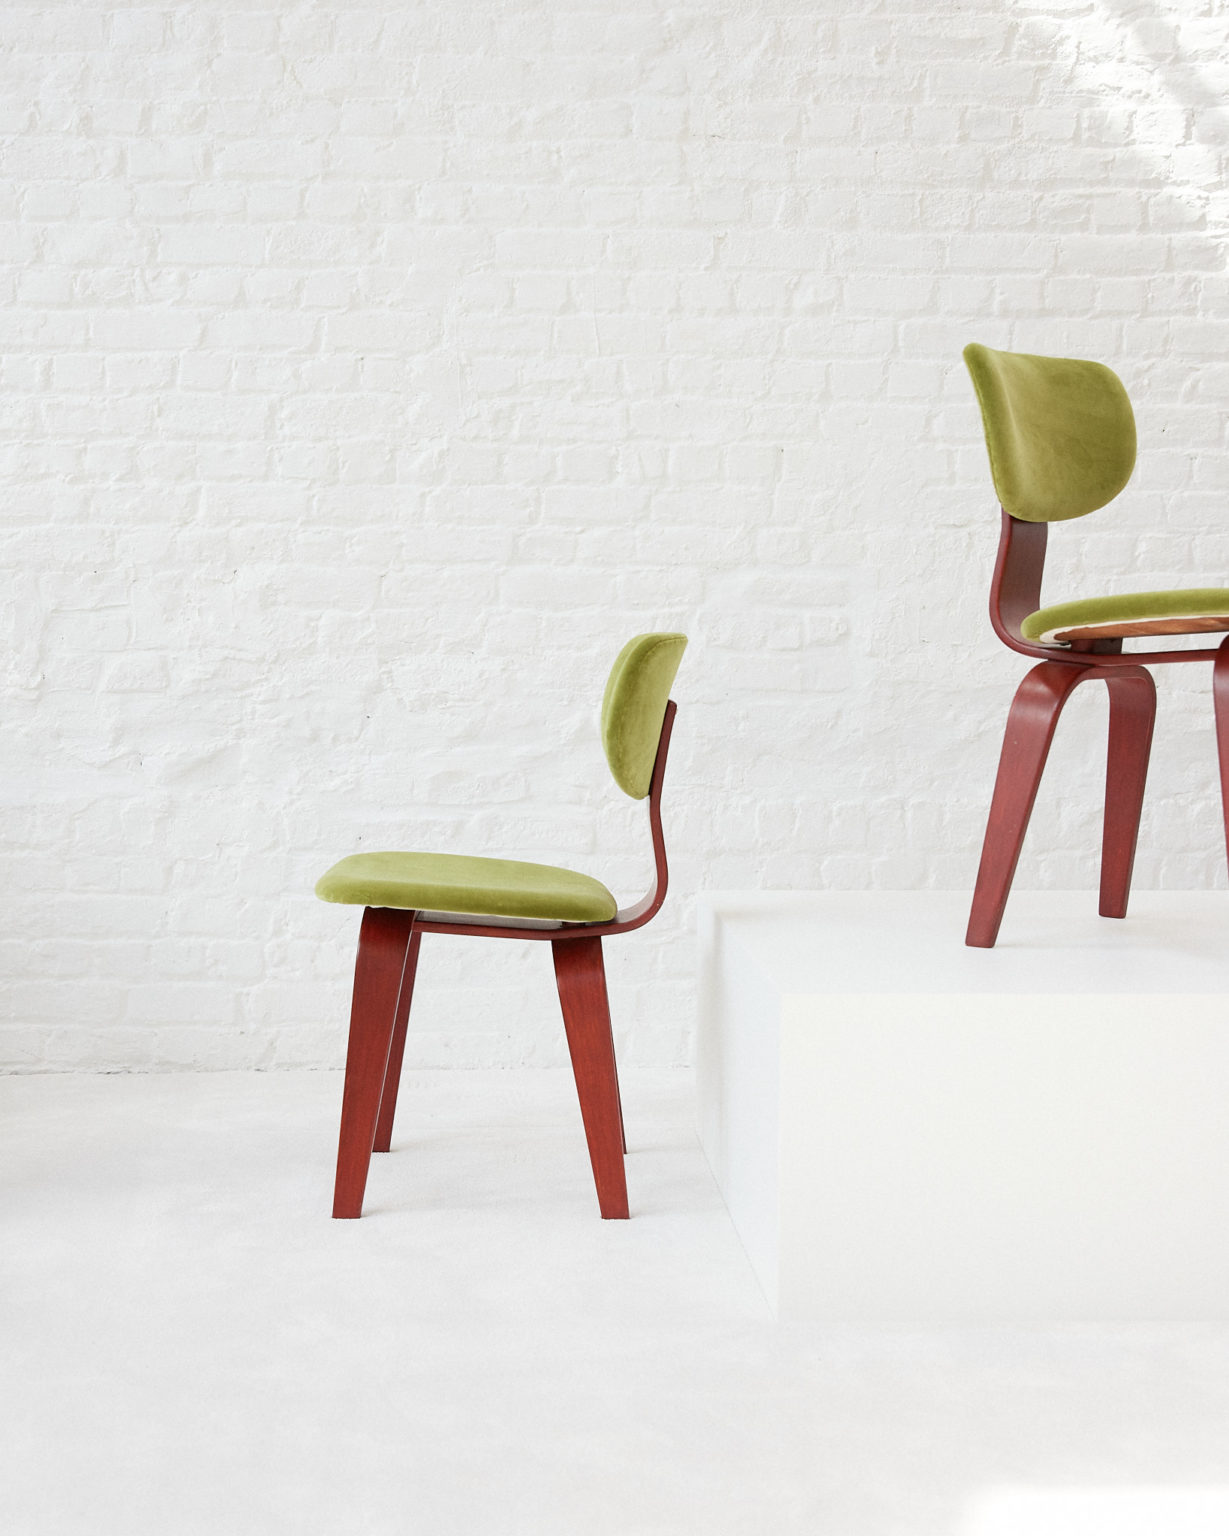 Set of 4 "SB 02" dining chairs by Cees Braakman